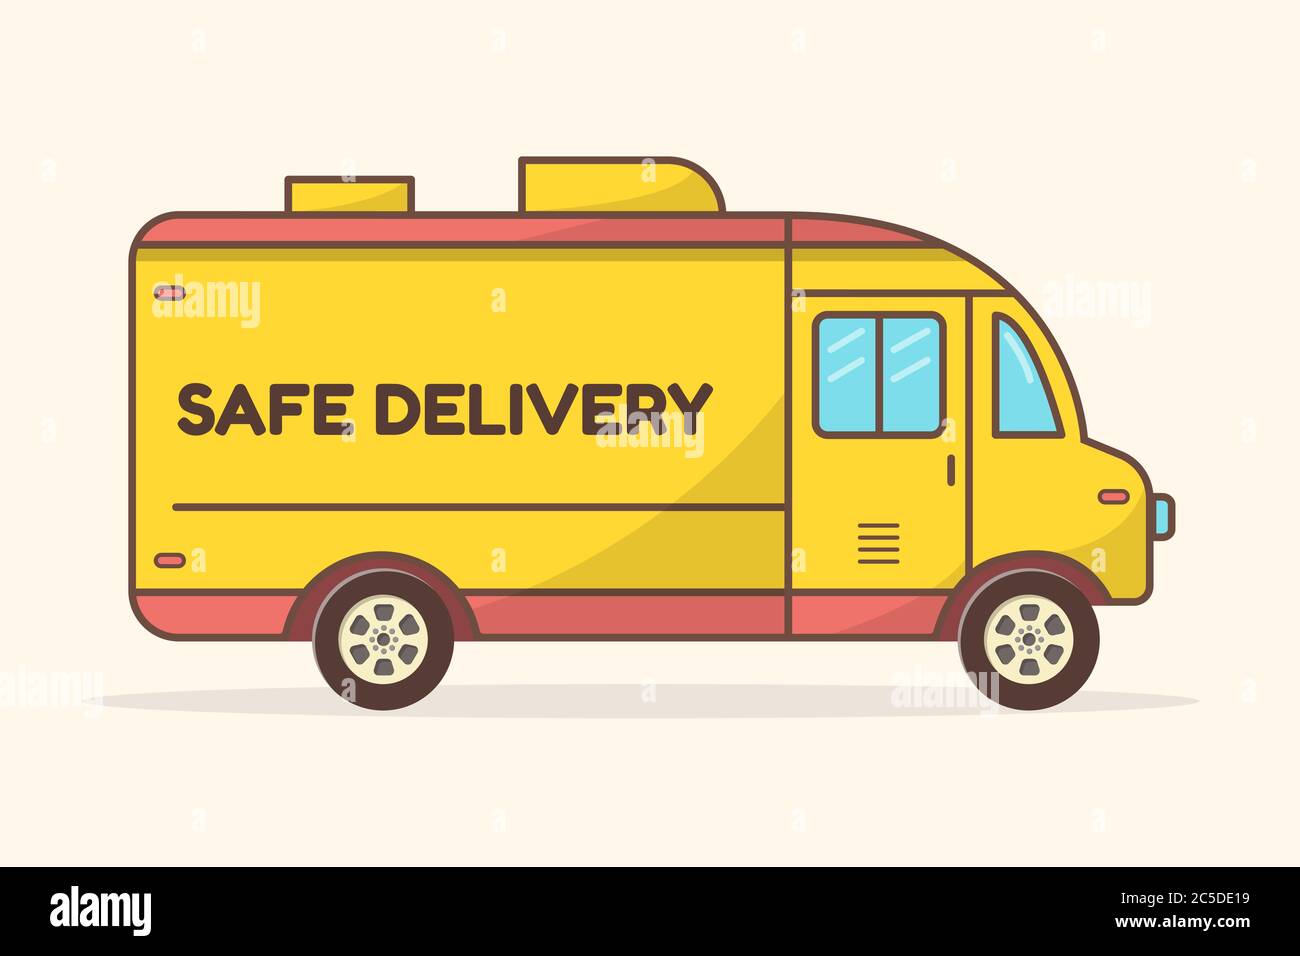 Delivery truck flat style vector stock illustration Stock Vector